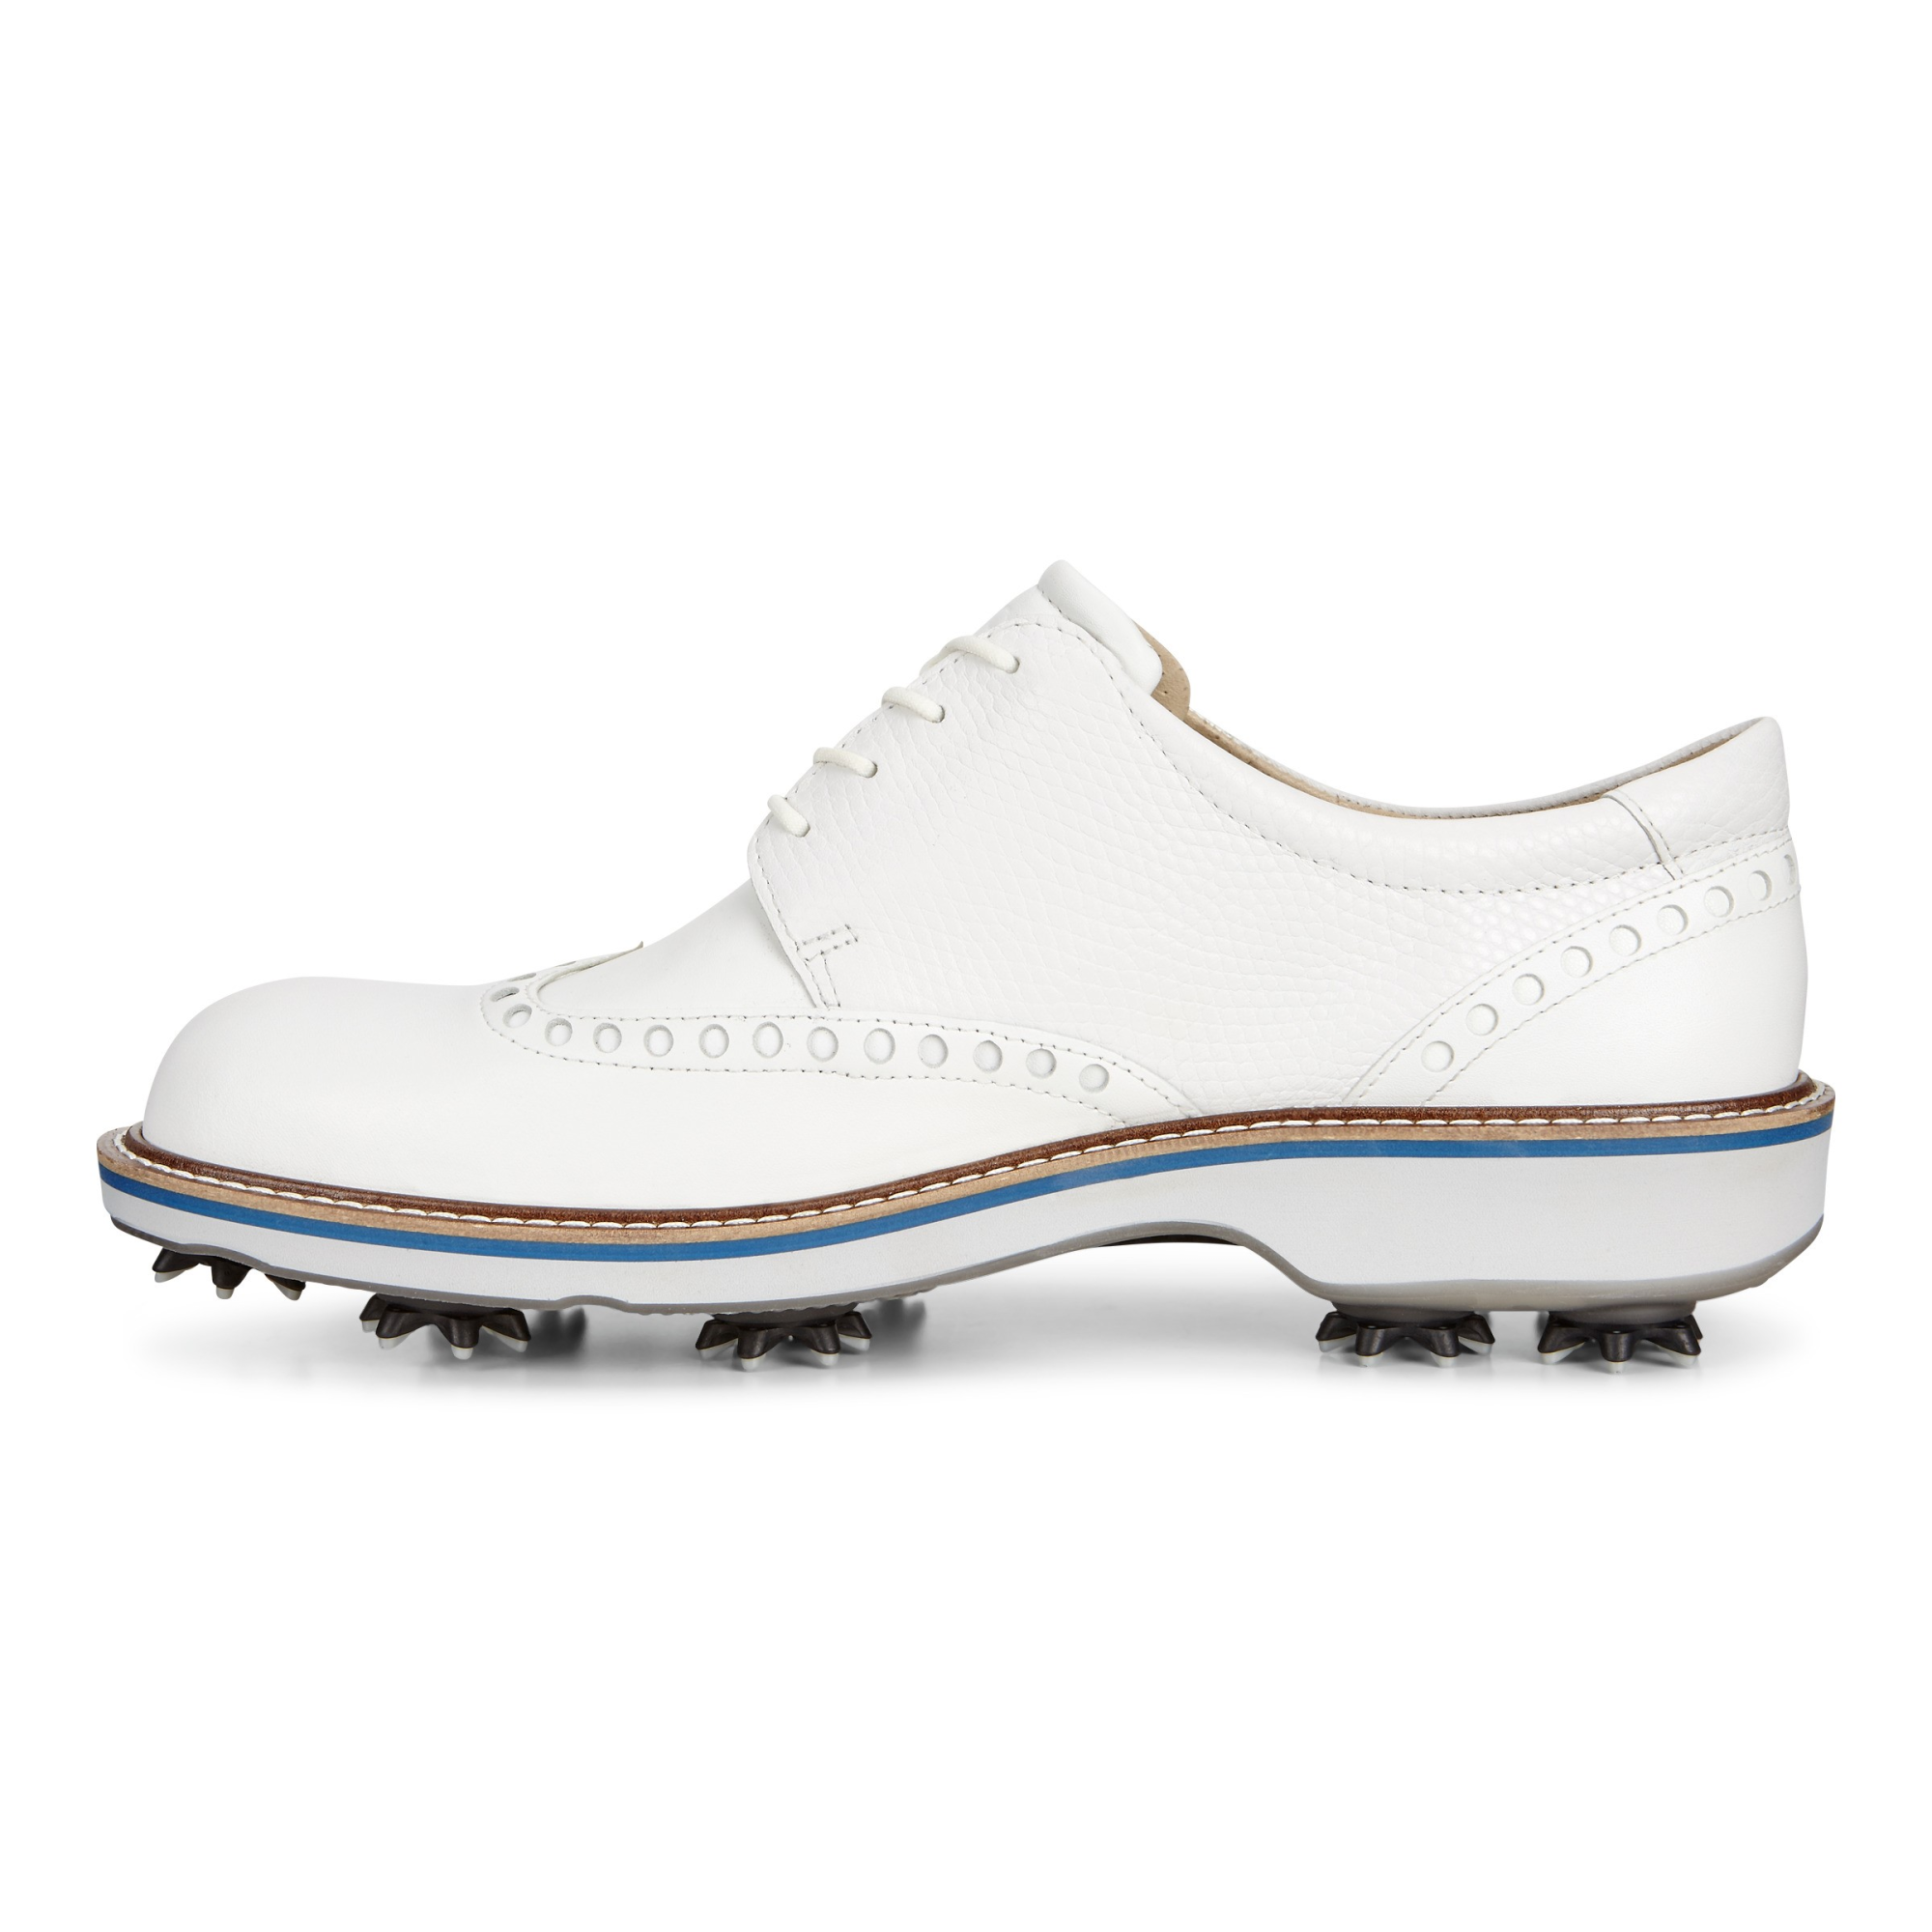 Ecco Mens Golf Lux 47 - Products - Veryk Mall - Veryk Mall, many quick response, safe your money!